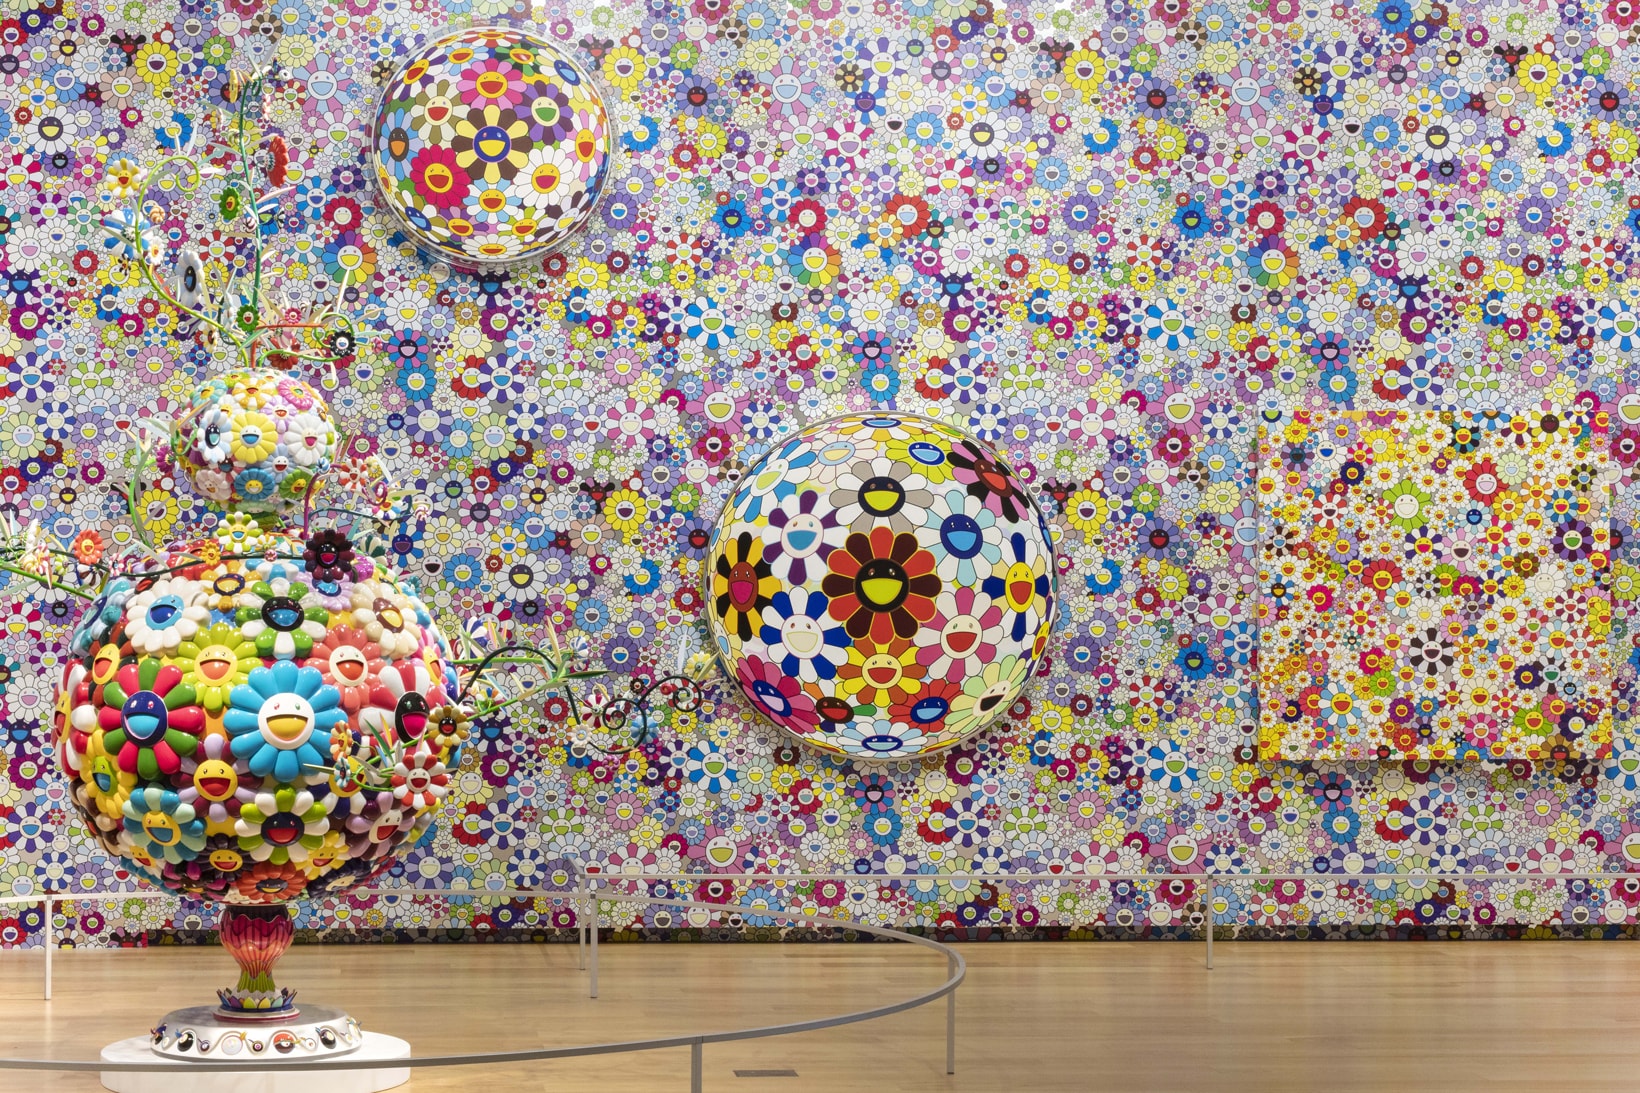 takashi murakami the octopus eats its own leg the modern museum of art fort worth texas exhibition paintings sculptures installations